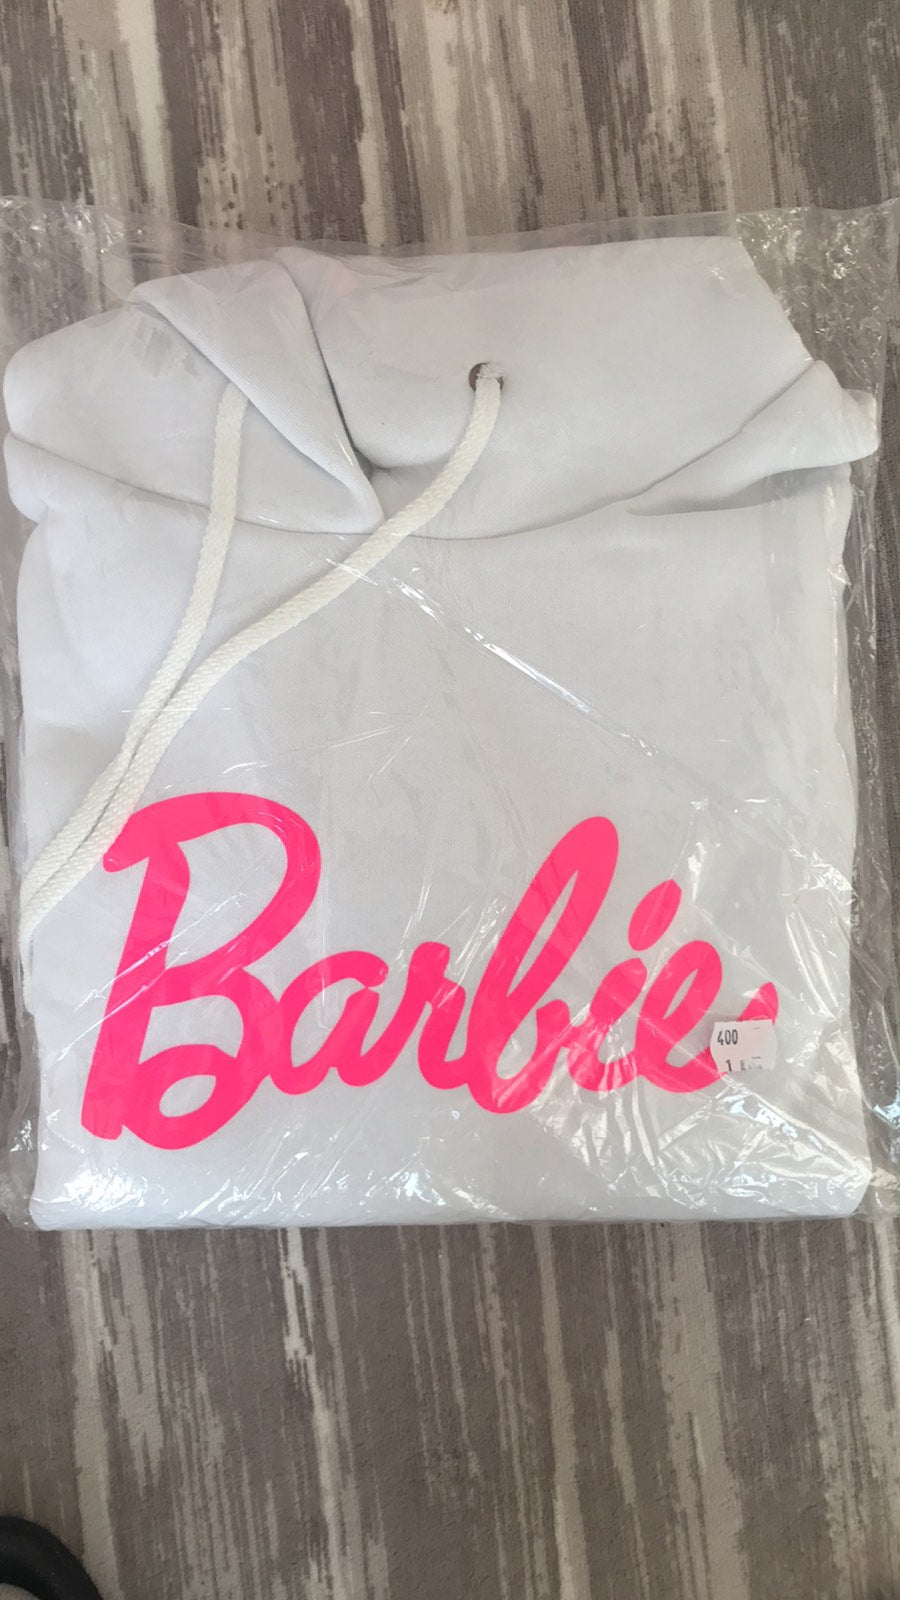 Women's Hoodie Barbie- ToroModa  https://www.toromoda.com/products/womens-hoodie-barbie  The hoodie have light cotton wool on the inside. The hoodie are extremely soft and provide maximum comfort and warmth during winter days. They are made of 100%.